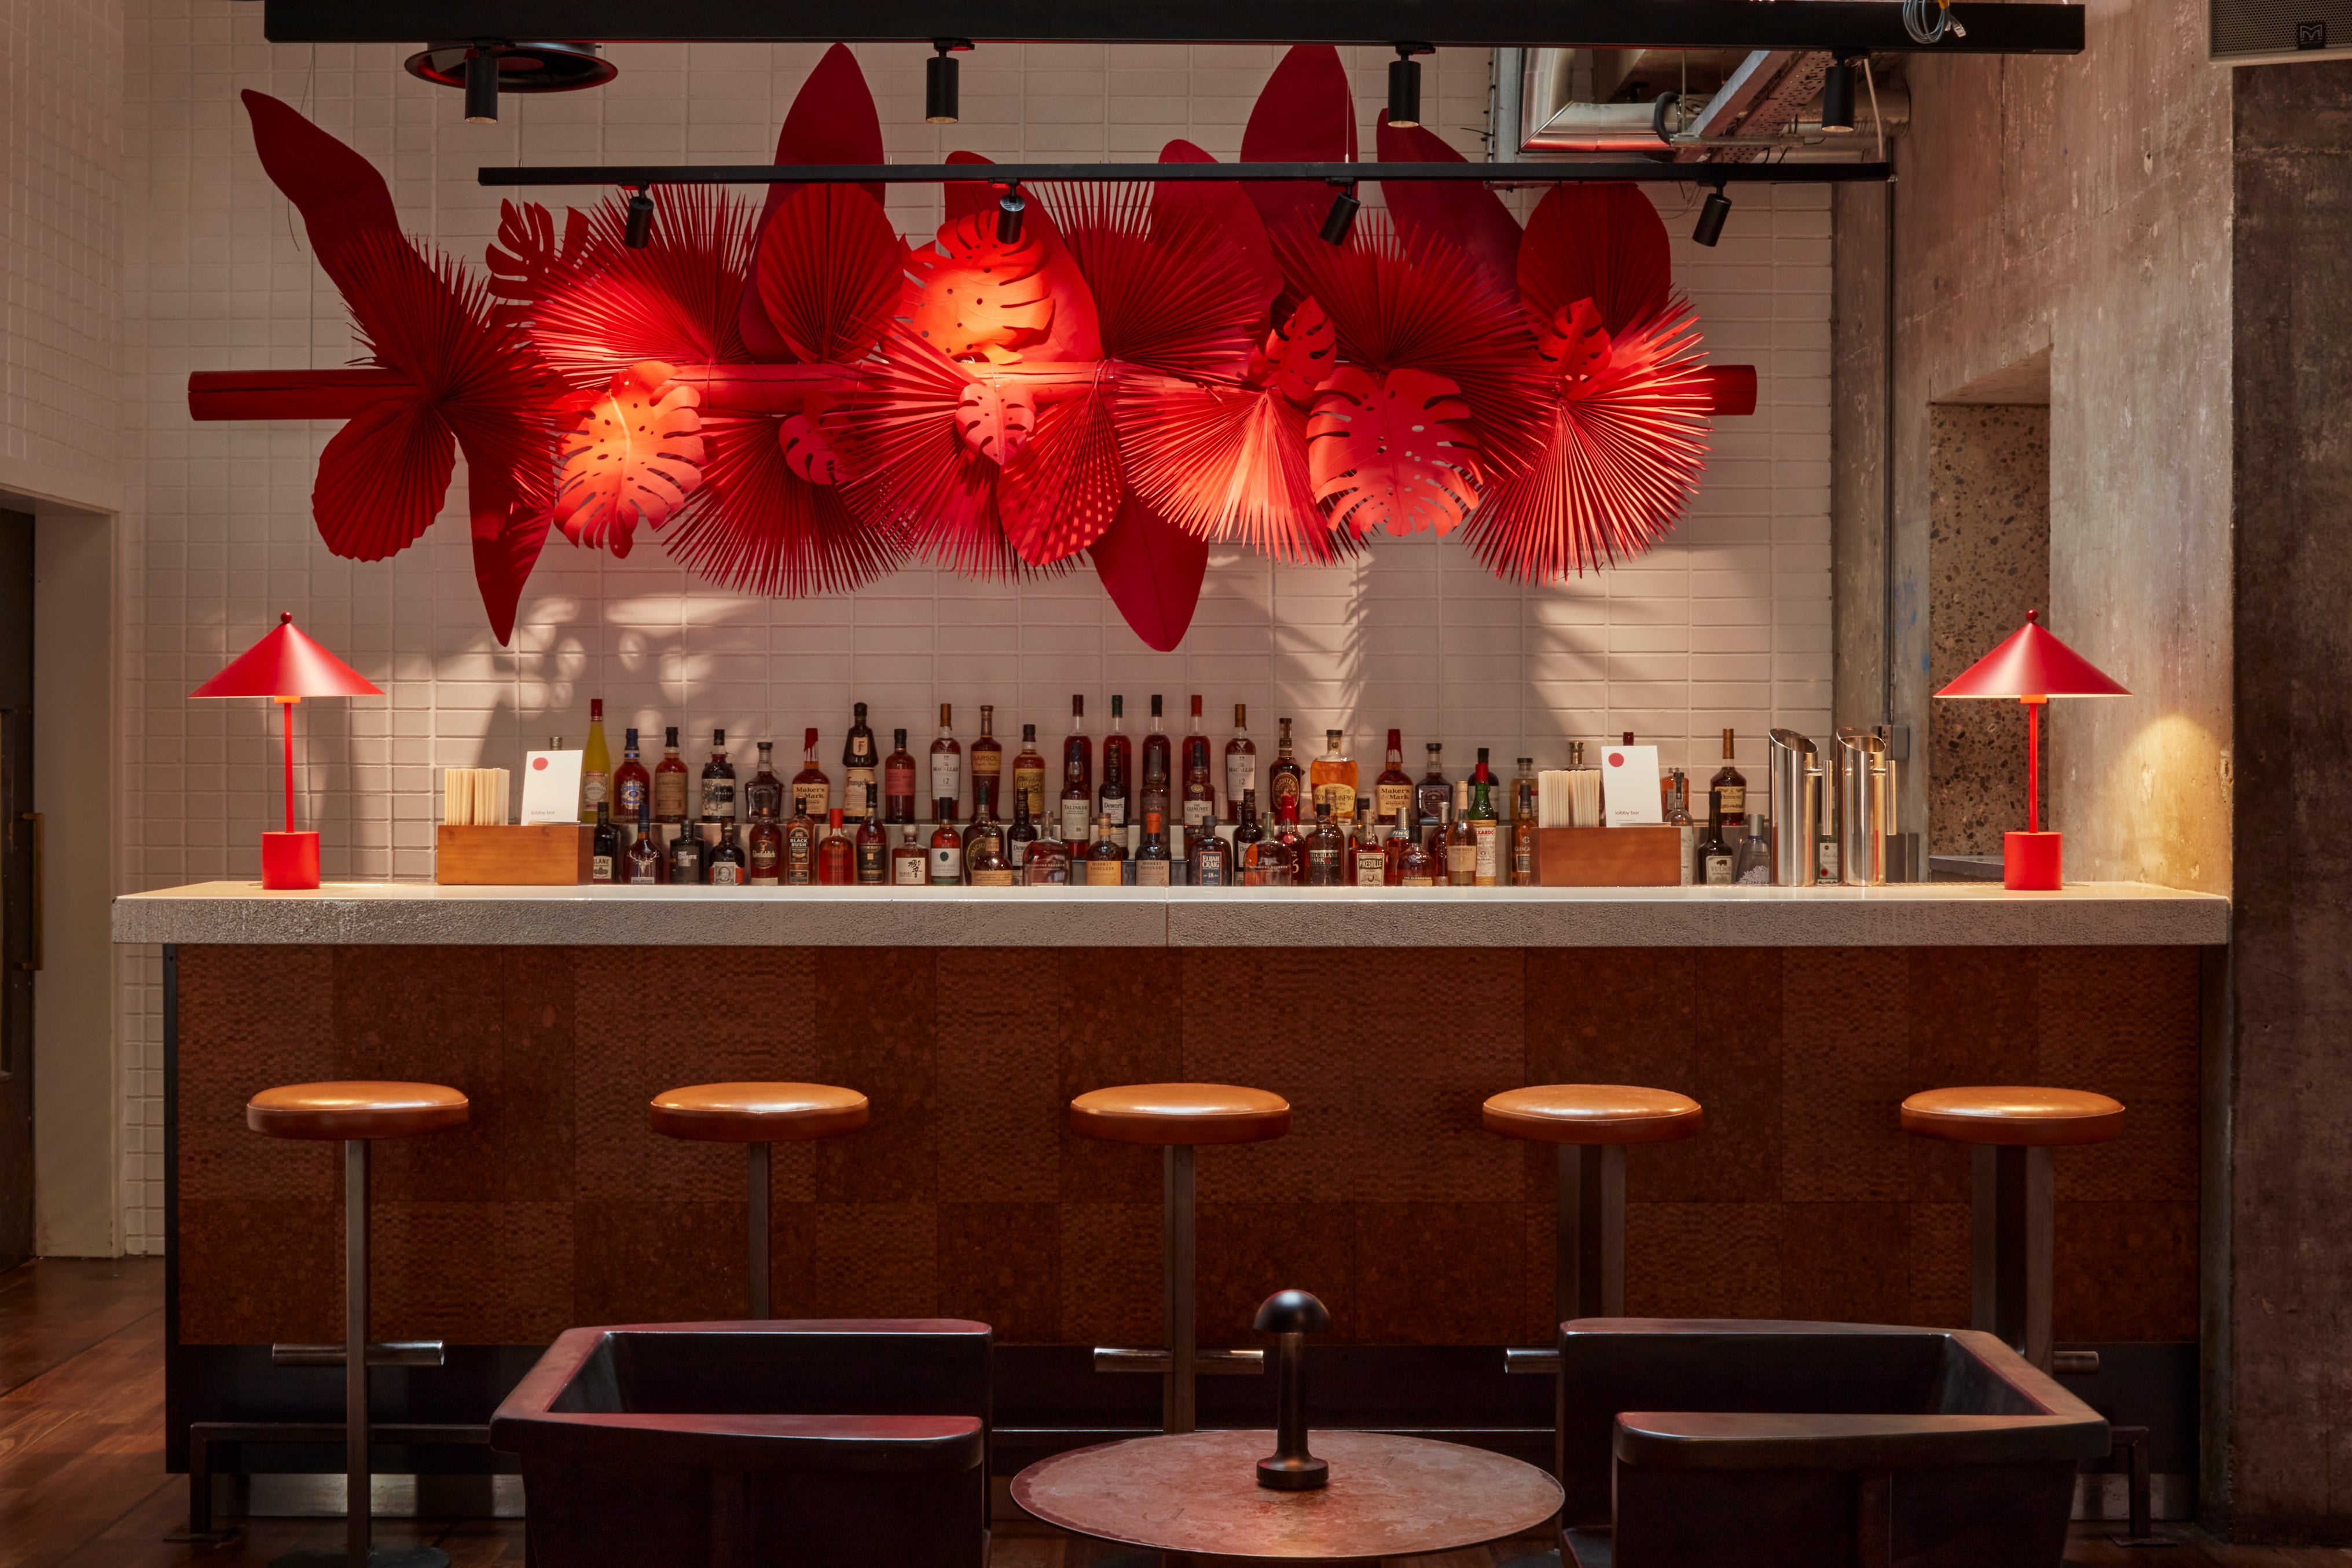 The vibrant red giant paper artwork adorning the Lobby Bar at One Hundred Shoreditch Hotel, creating an inviting and stylish atmosphere with its intricate design of tropical leaves.